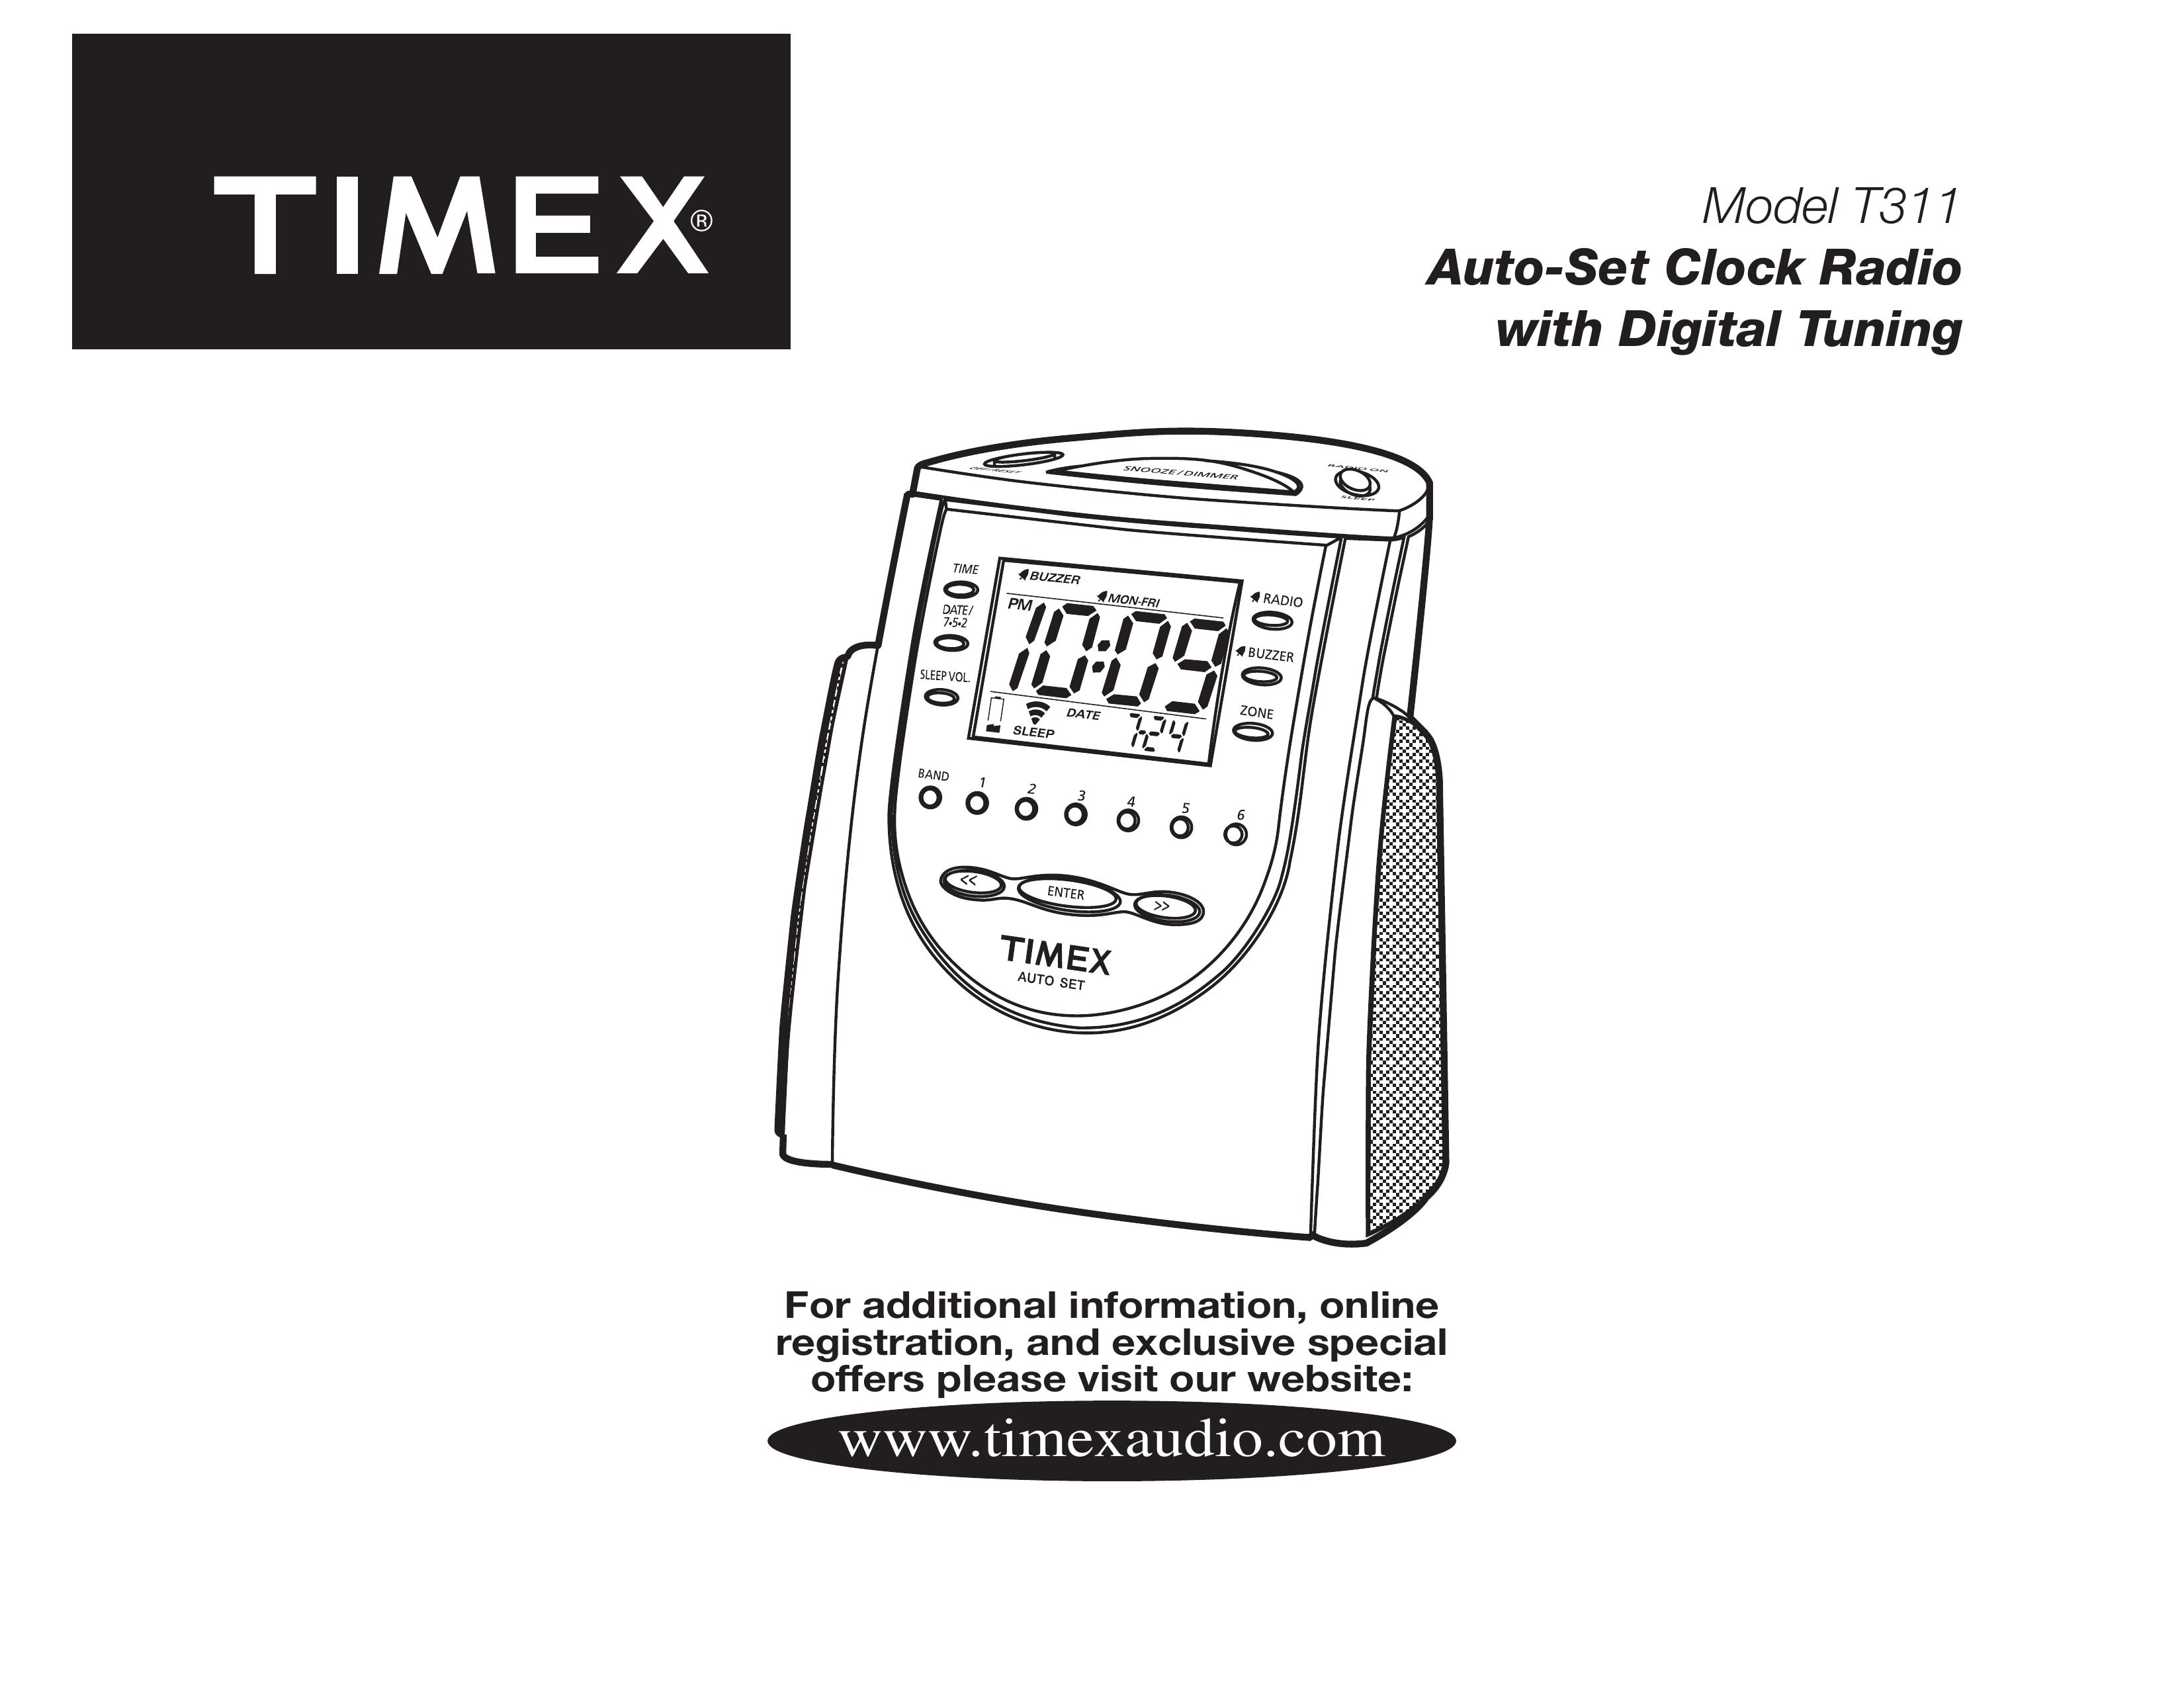 TIMEX Weather Products T311 Clock Radio User Manual